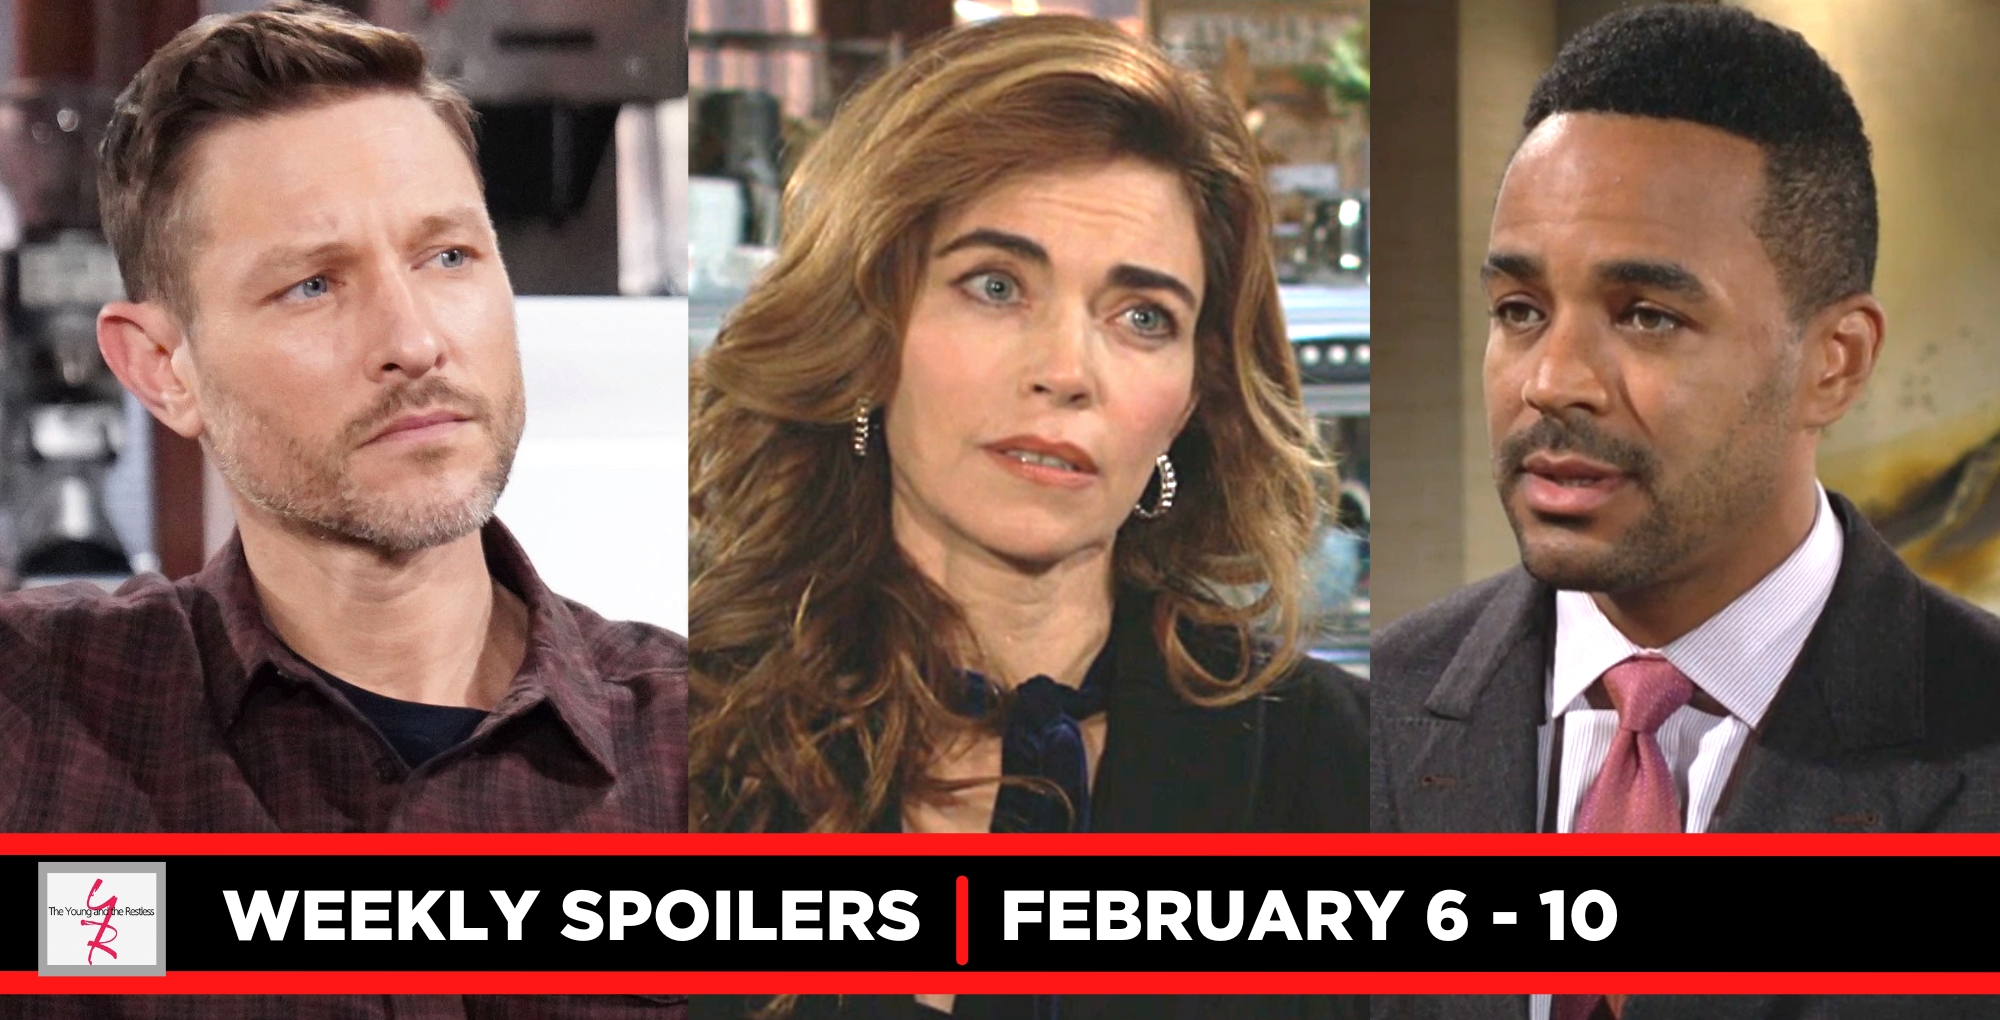 young and the restless spoilers for the week of February 6-February 10, 2023, three images daniel, victoria, and nate